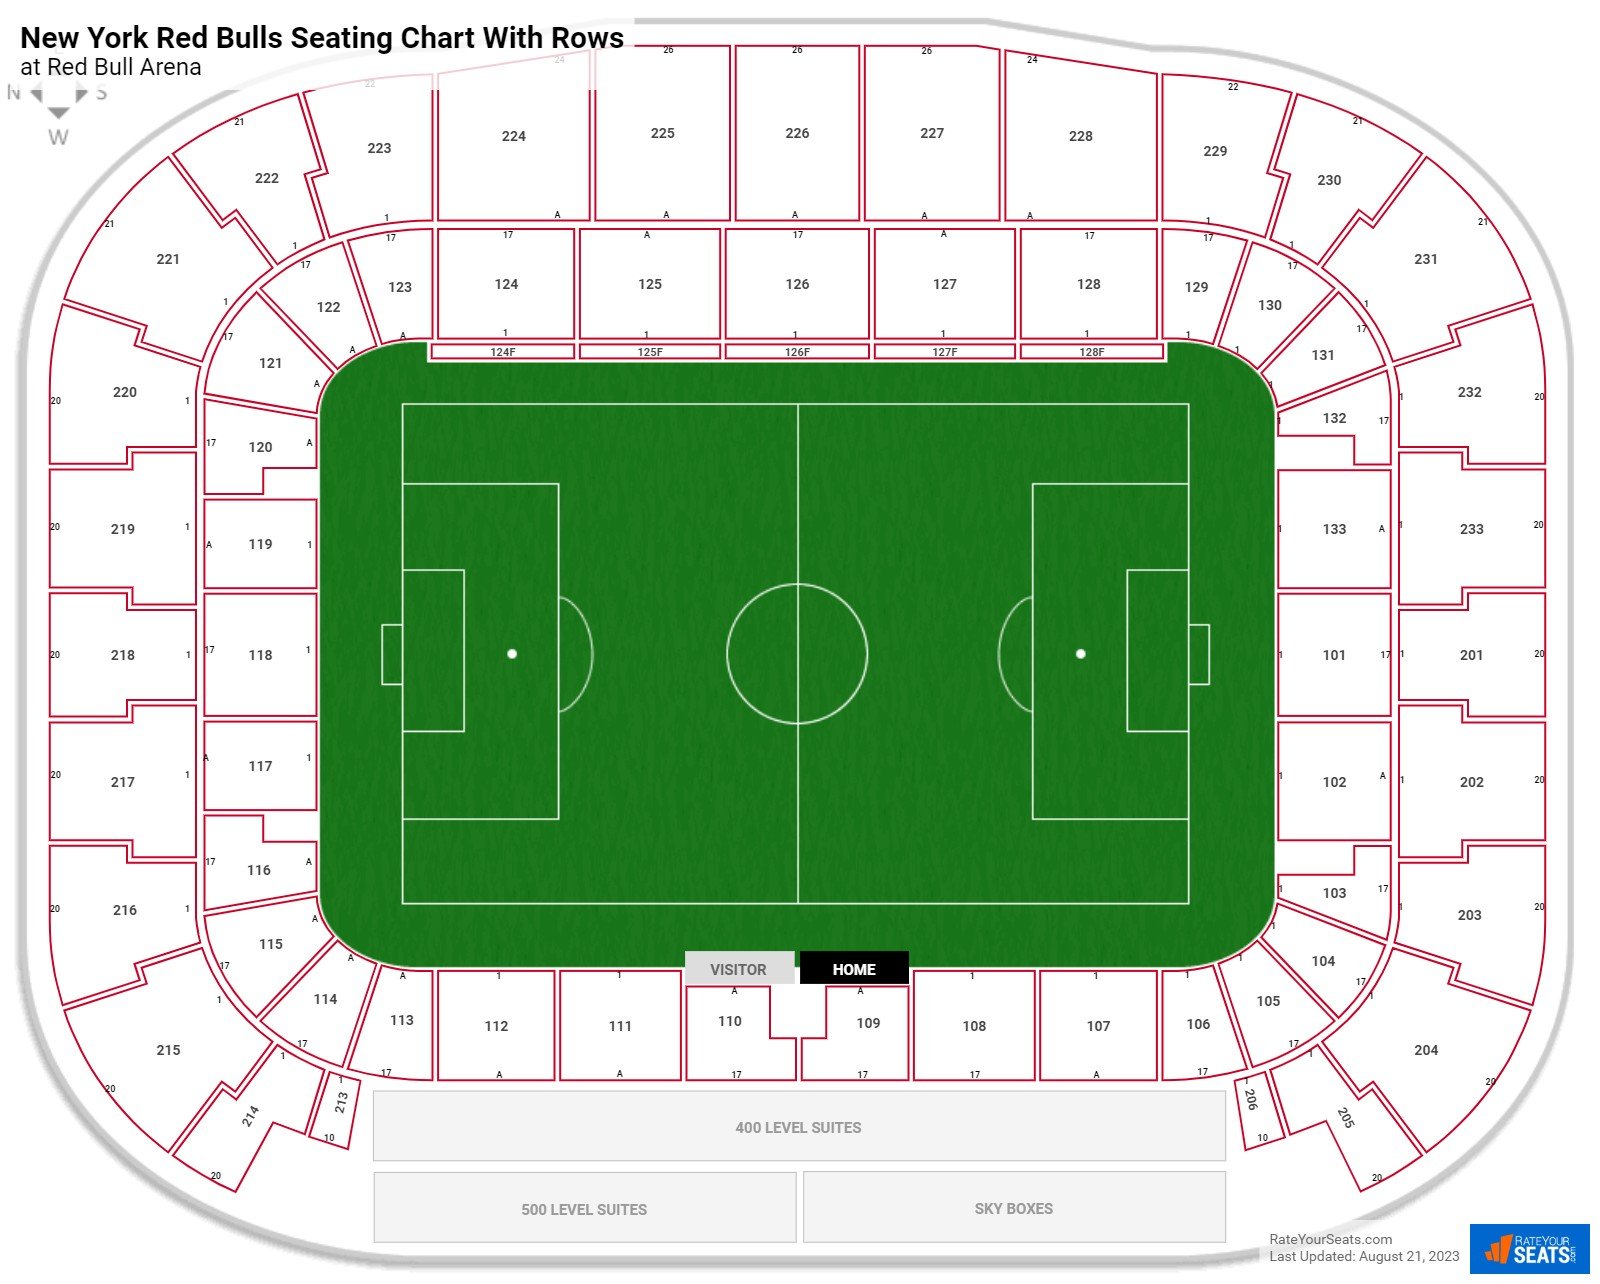 Red Bull Arena seating chart with row numbers